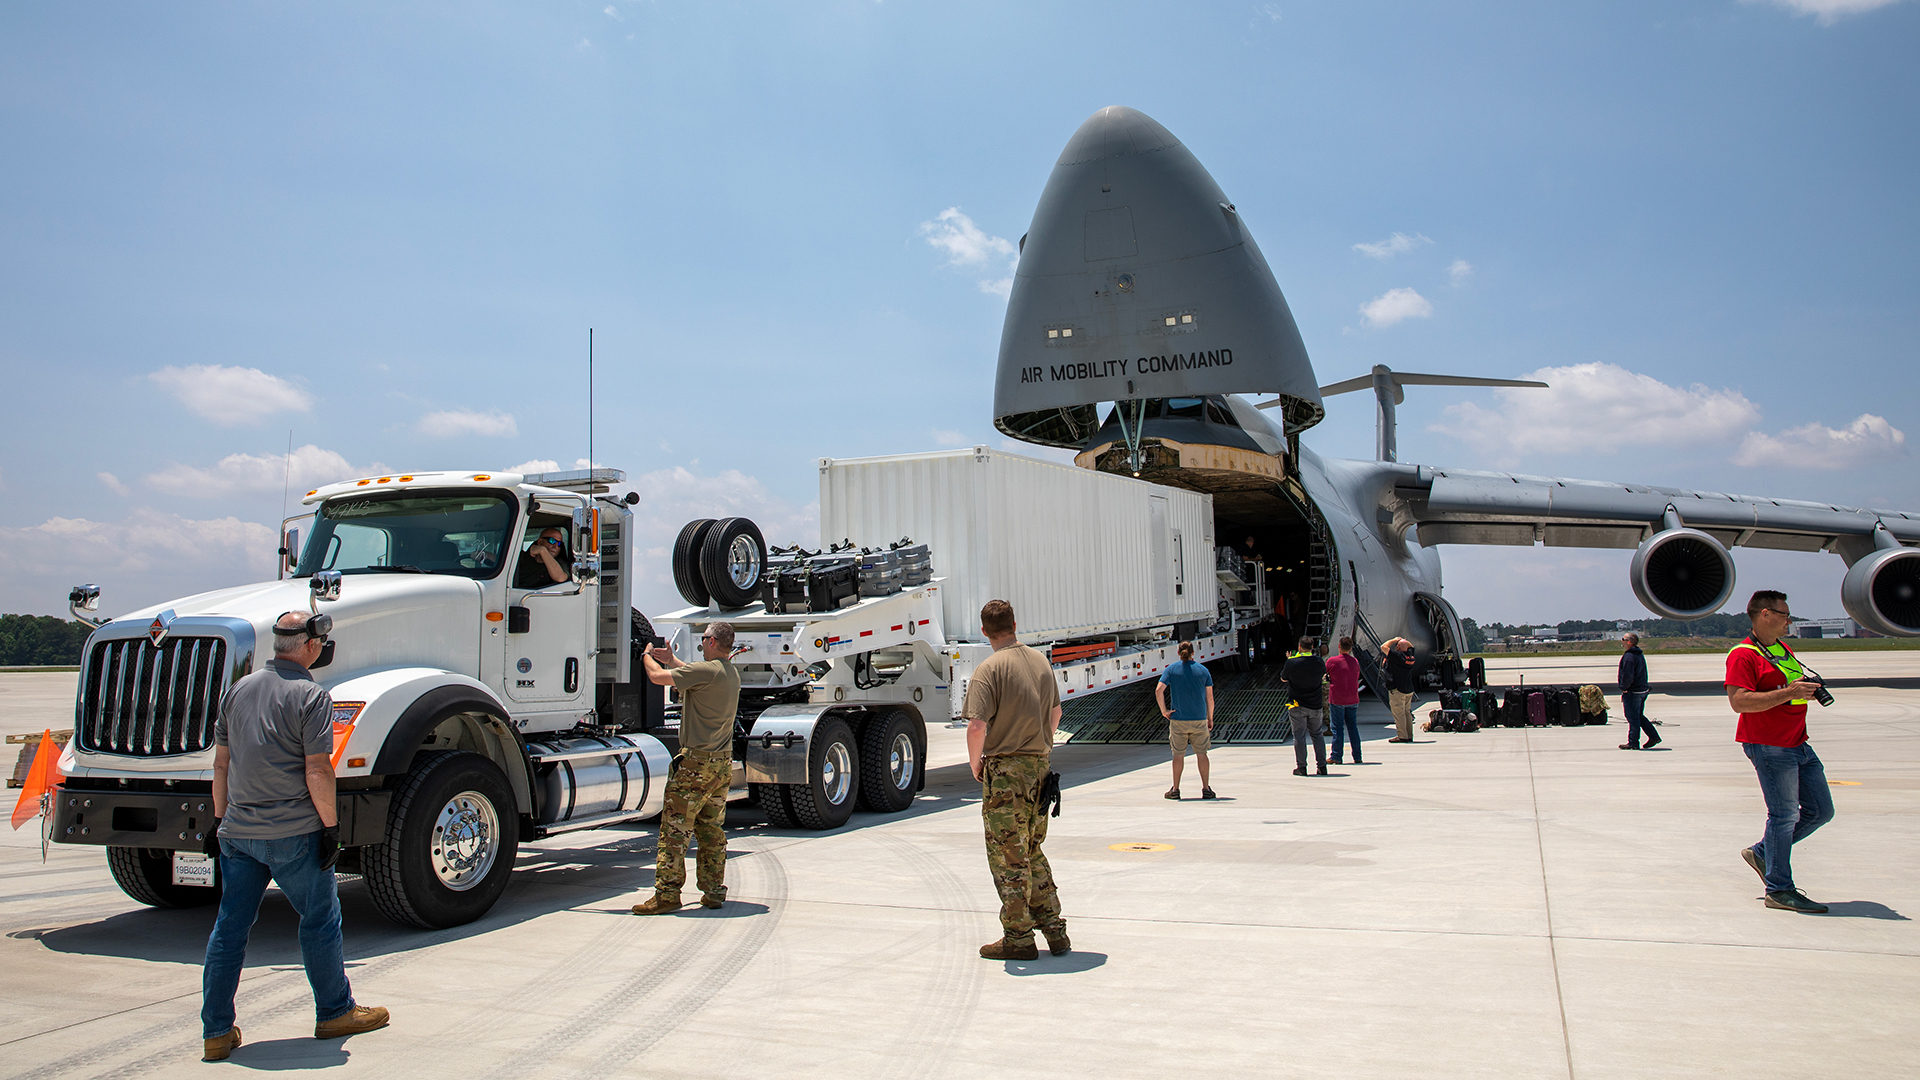 The ARTS-V1 system being loaded into a C-5M Super Galaxy aircraft.